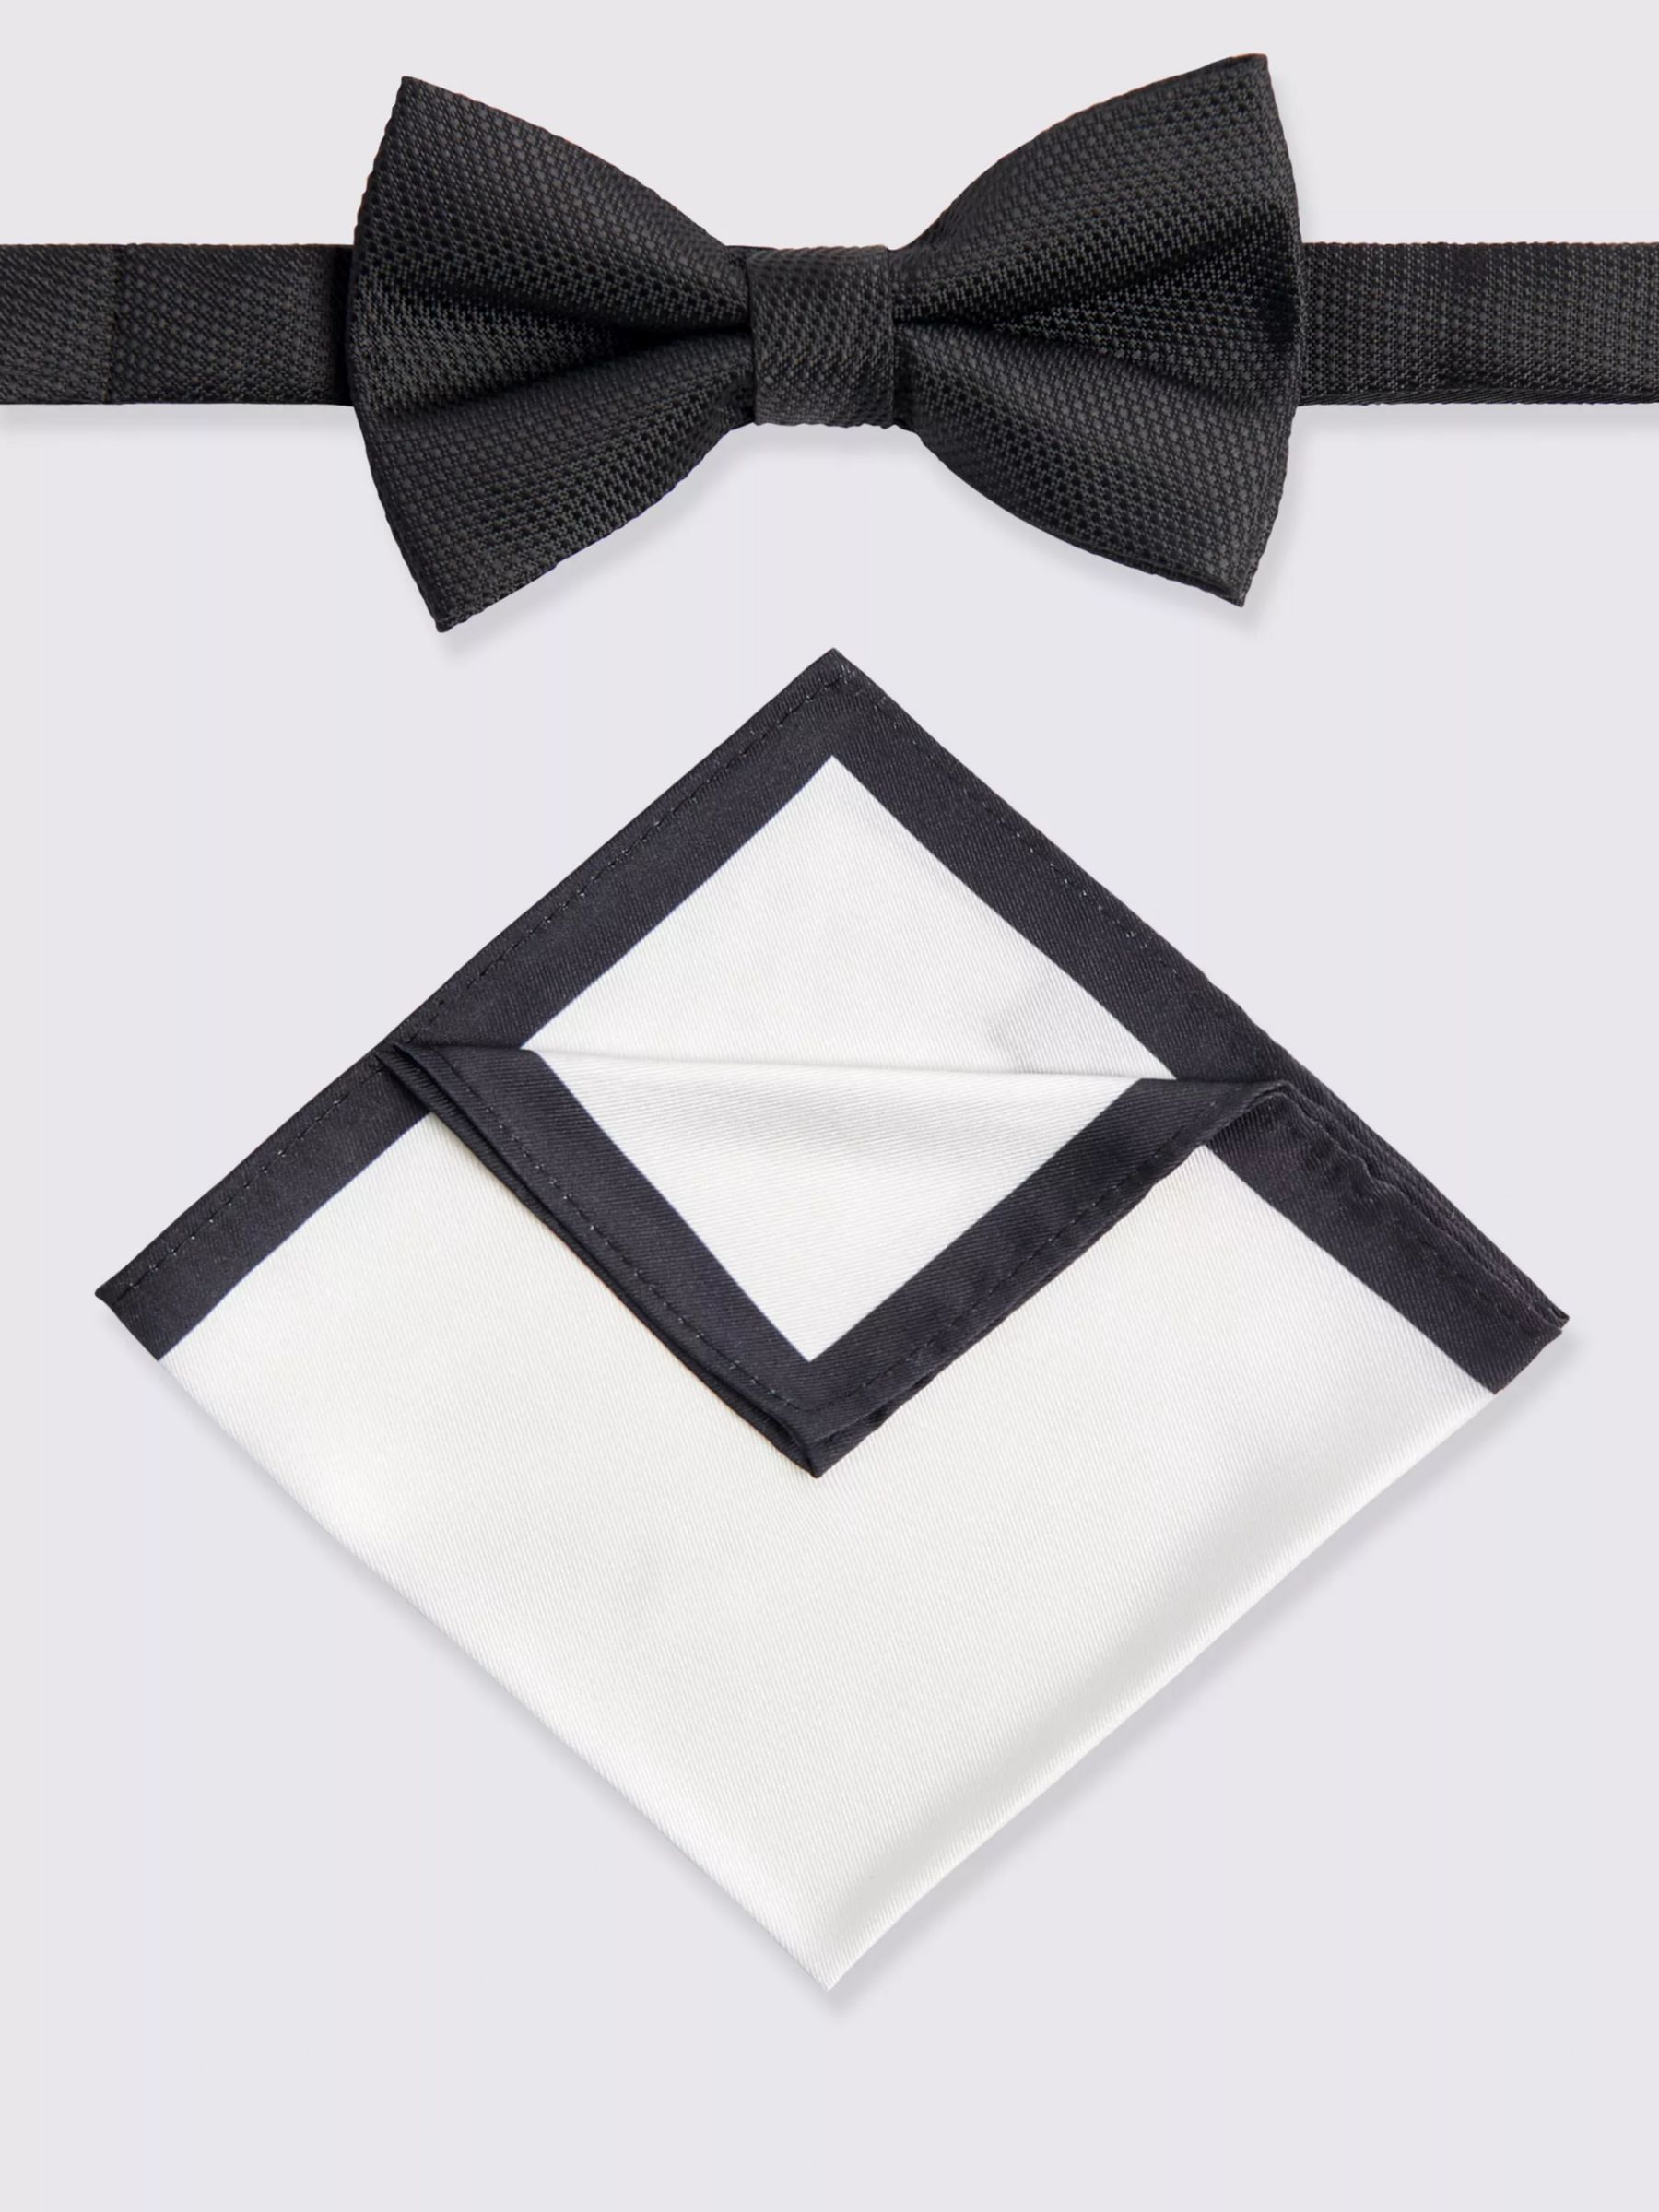 Moss Textured Bow Tie & Pocket Square Set, Black/White, One Size